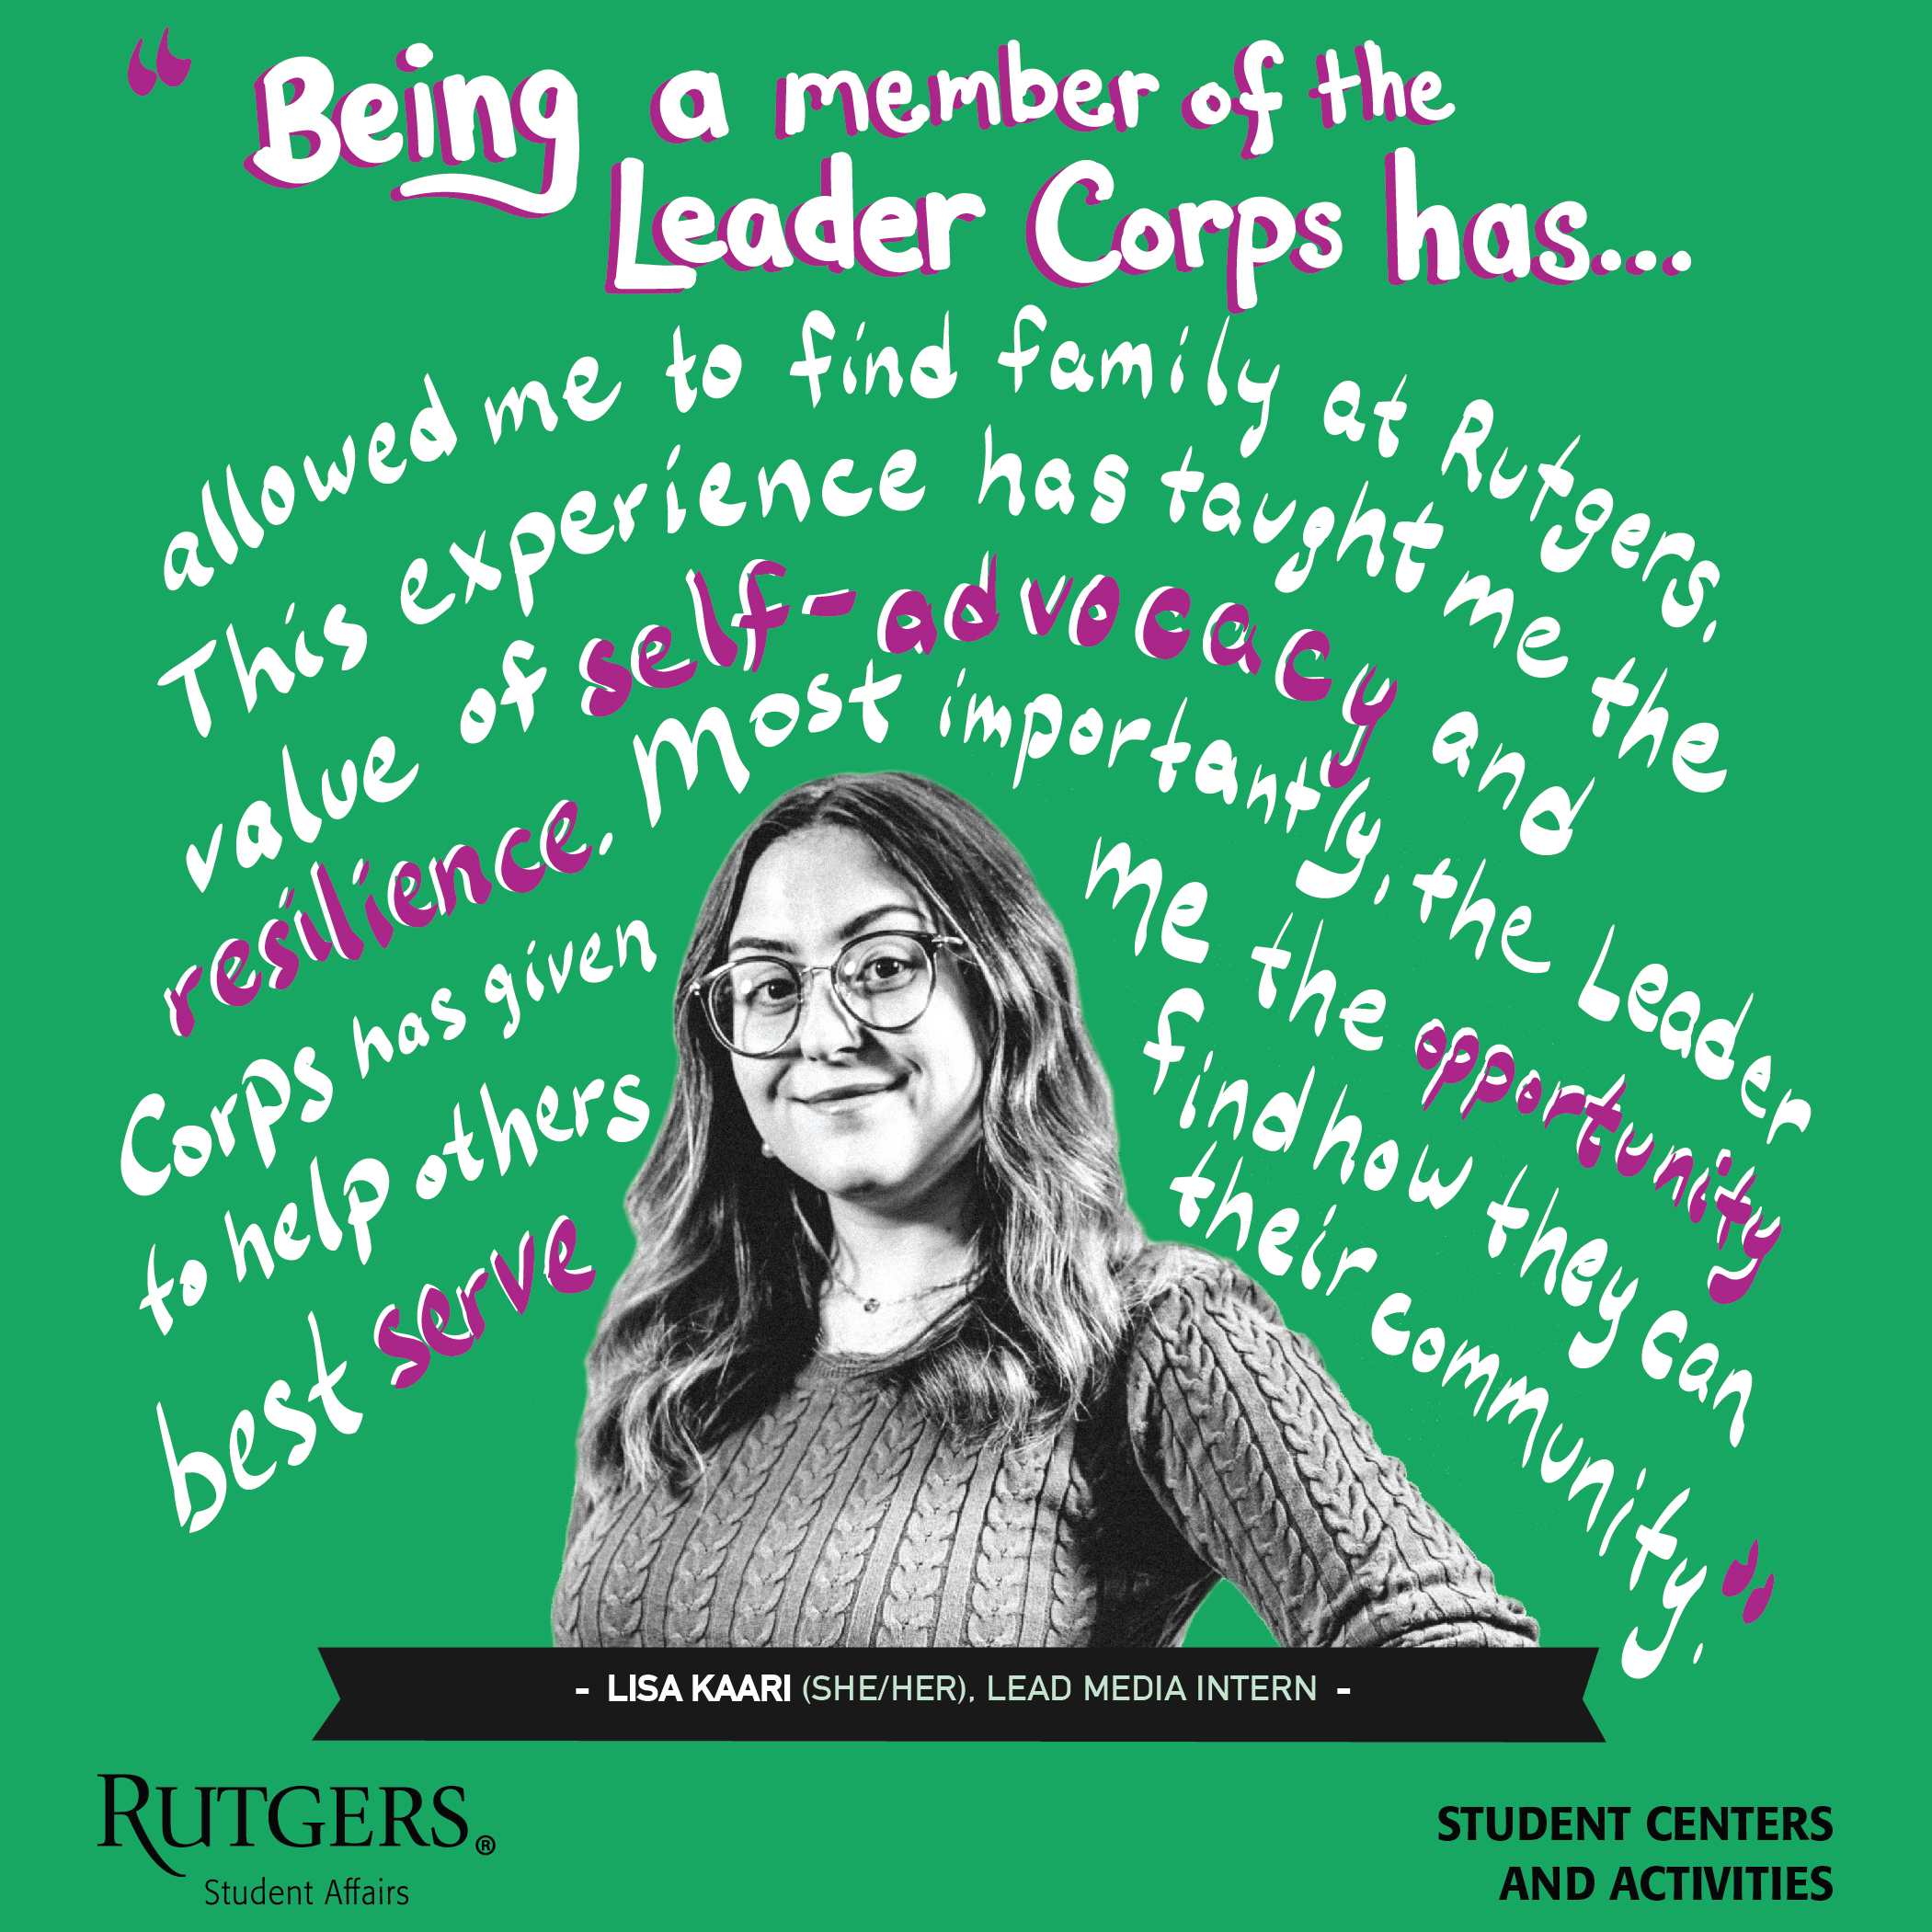 A quote by Lisa Kaari: "Being a member of the Leader Corps has allowed me to find family at Rutgers. This experience has taught me the value of self-advocacy and resilience. Most importantly, the Leader Corps has given me the opportunity to help others find how they can best serve their community."